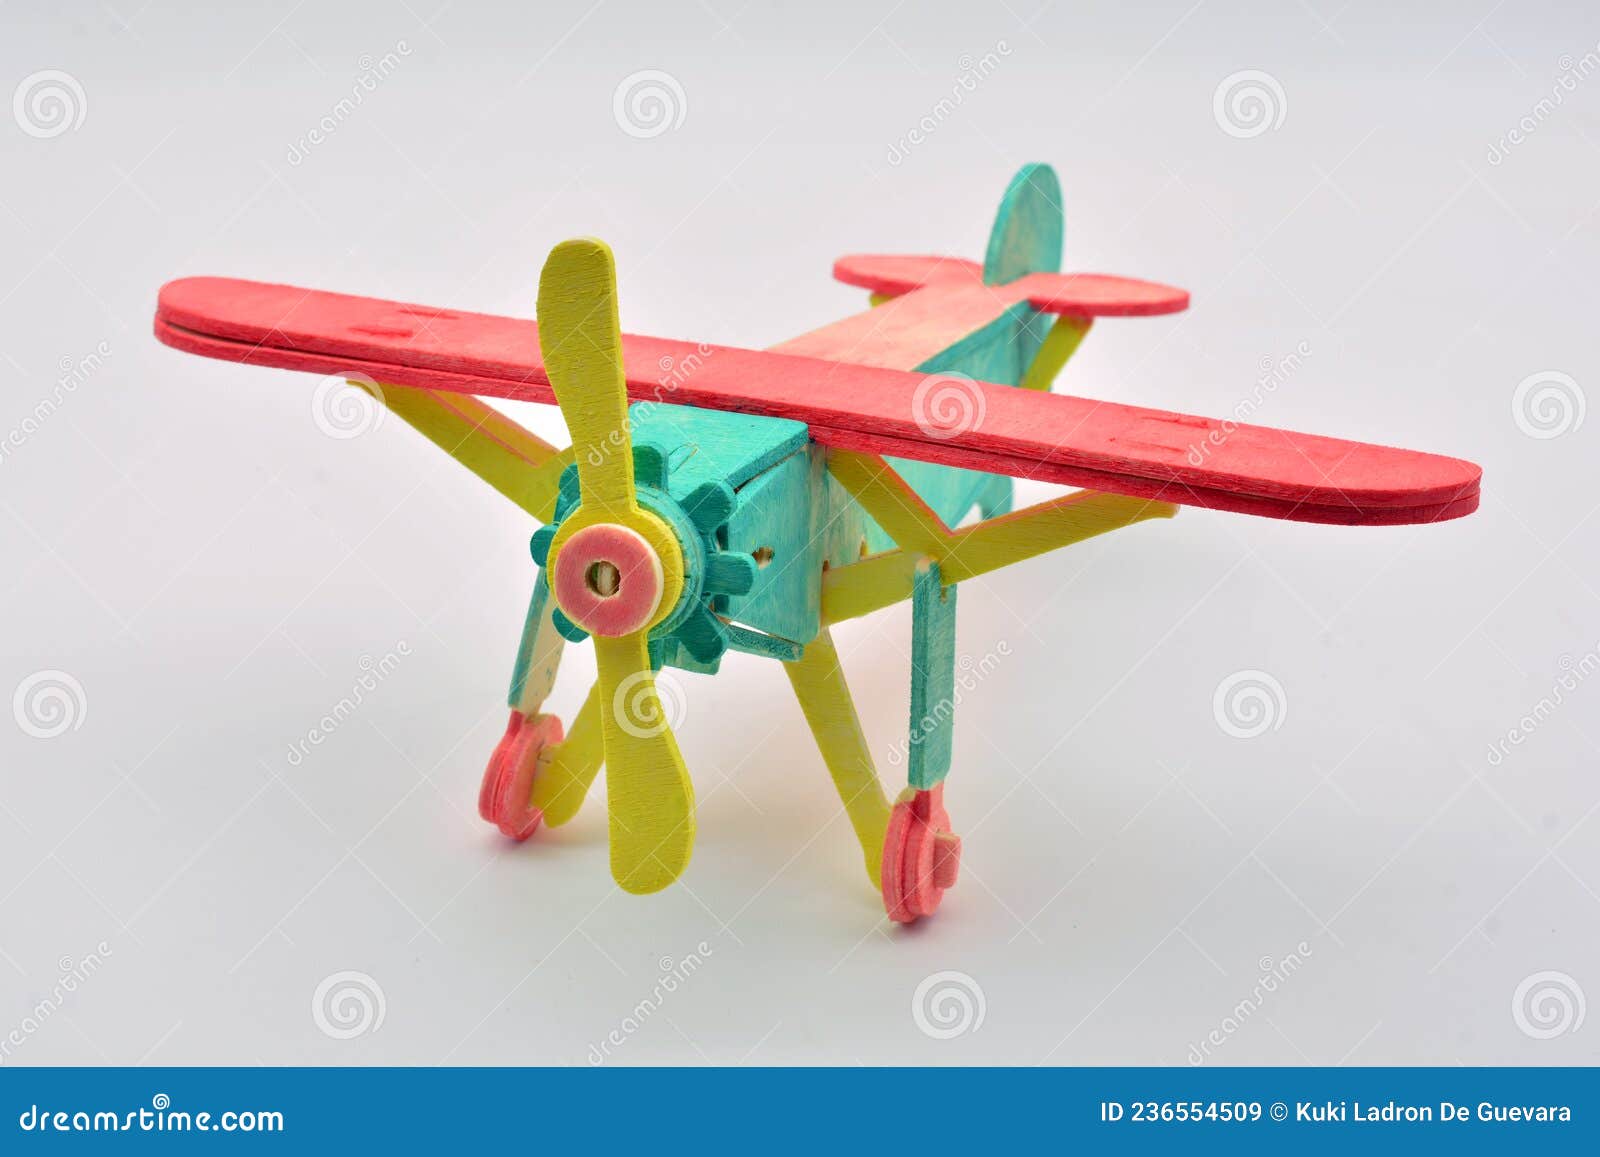 colorful painted wooden plane